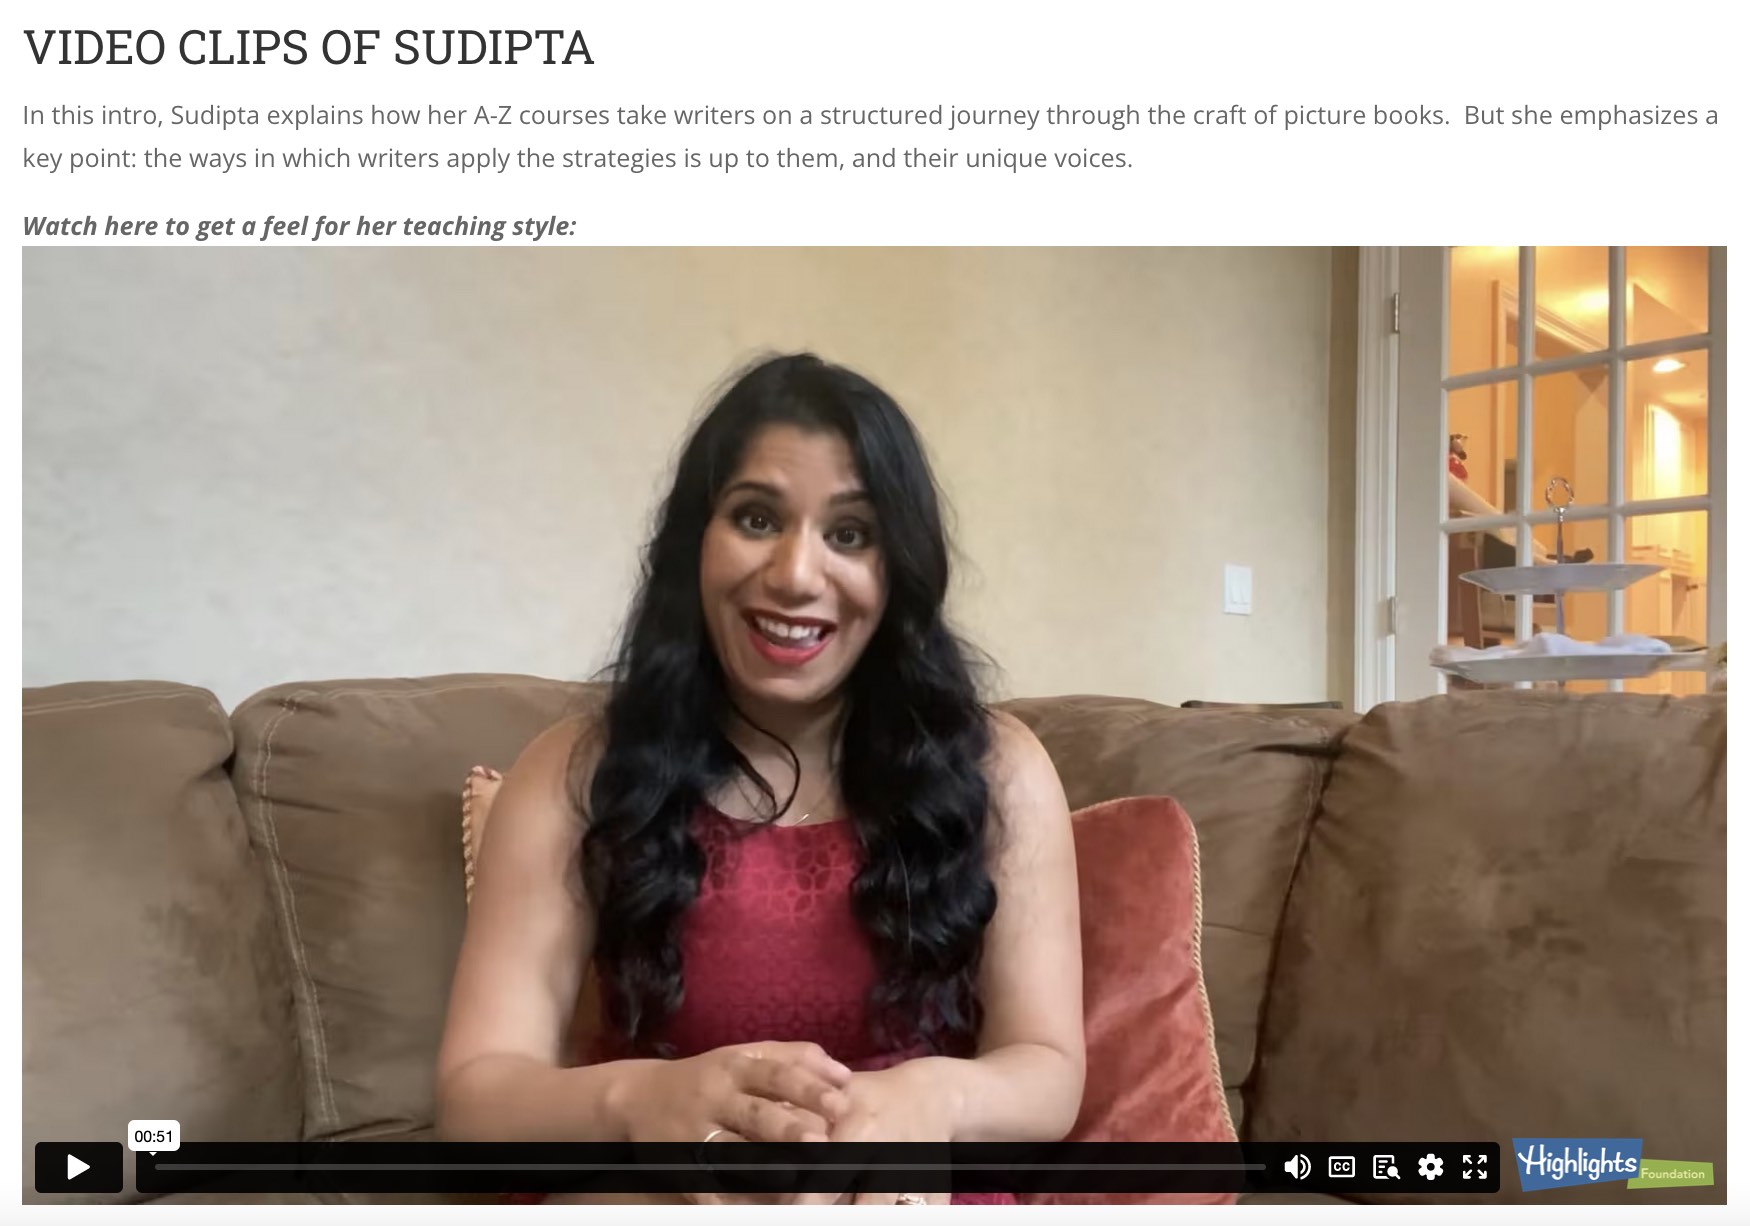 Sudipta's Author Page on our website